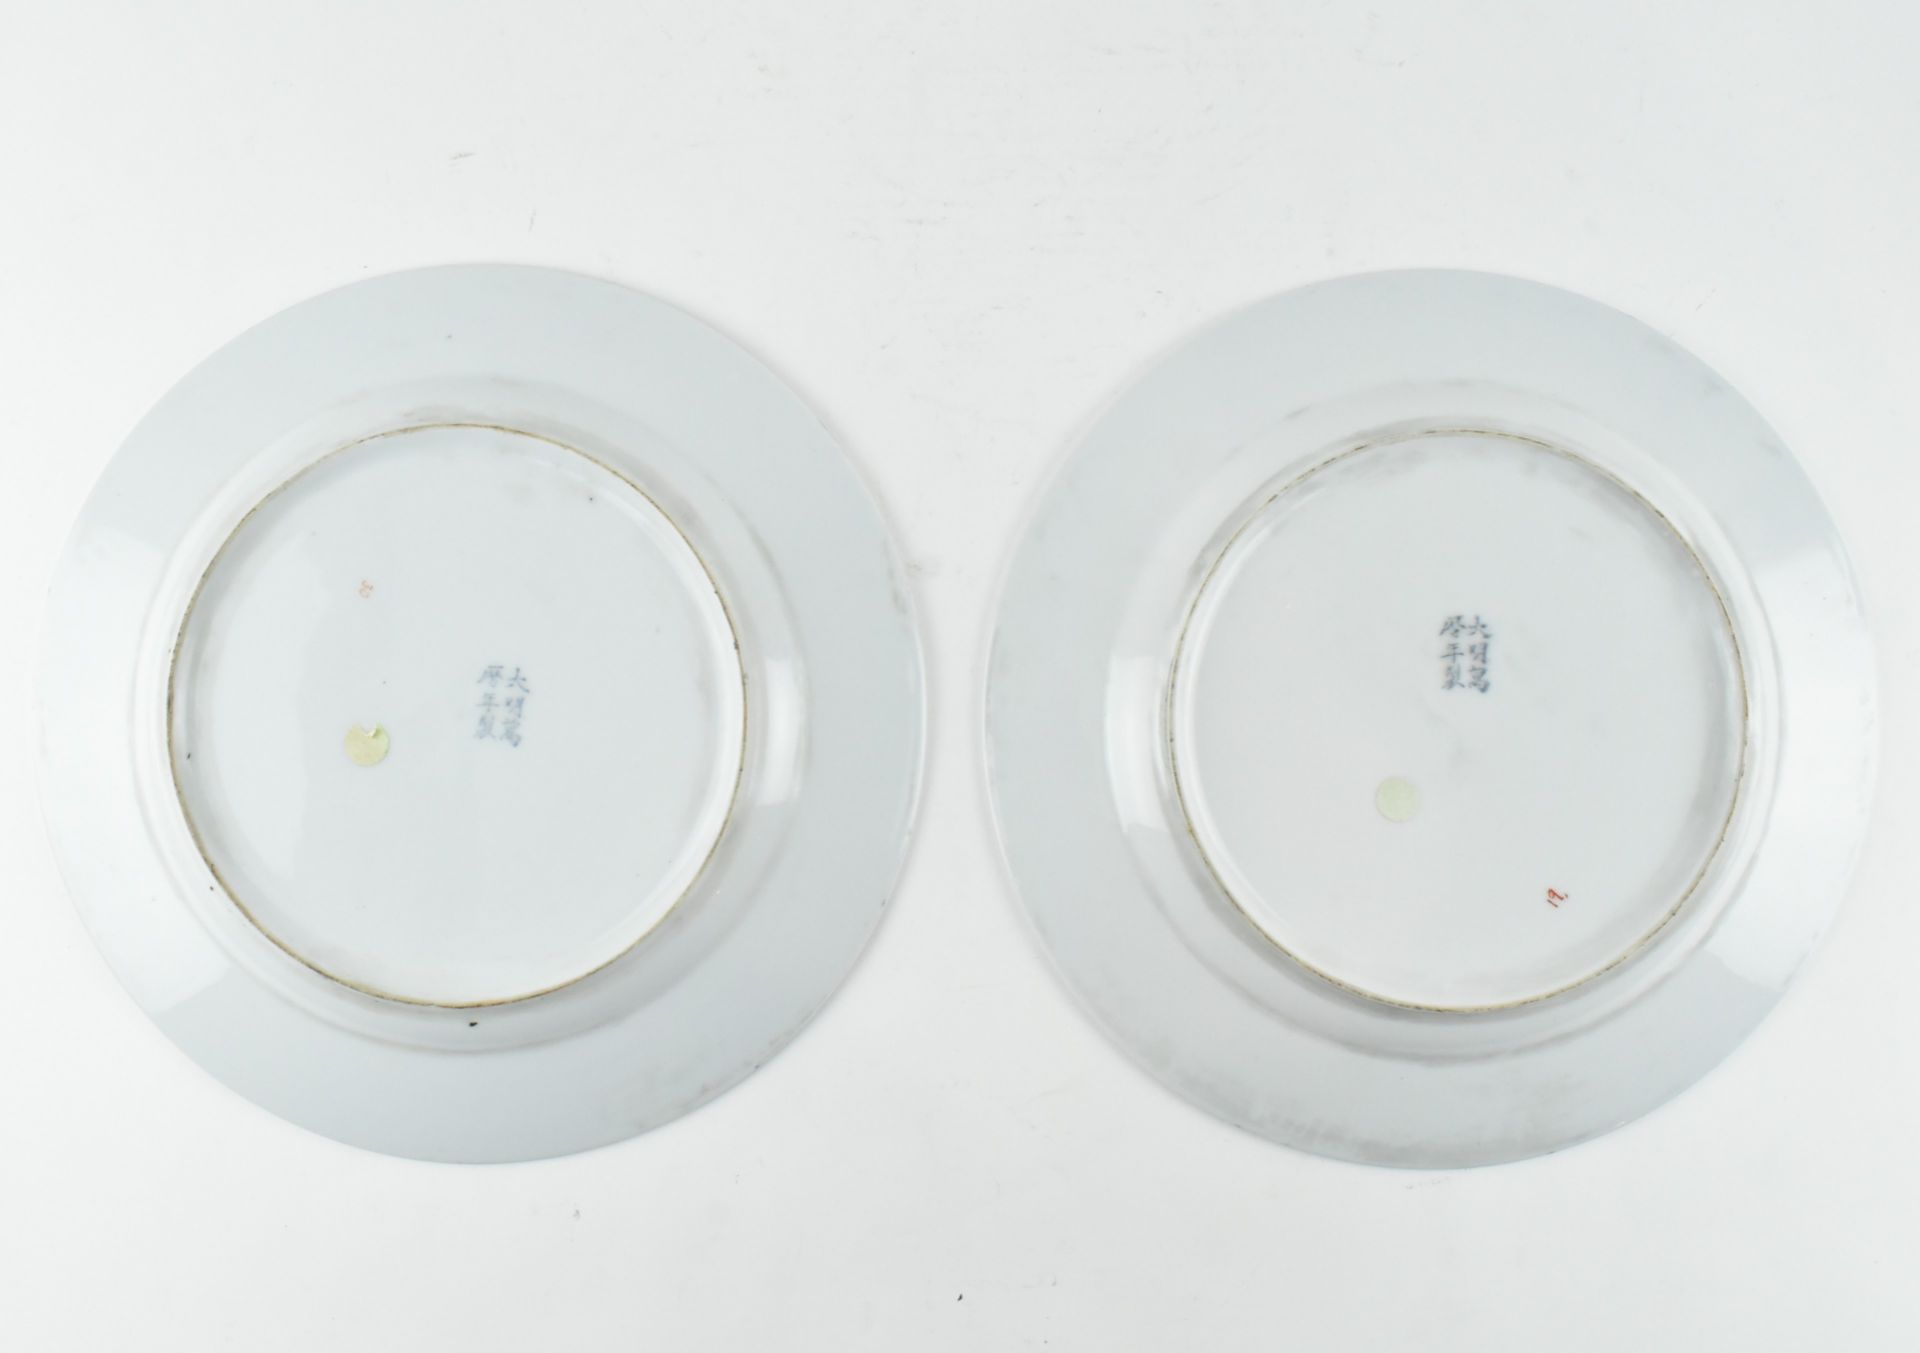 PAIR OF BLUE AND WHITE PHOENIX CHARGERS 晚清牡丹凤凰盘一对 - Image 5 of 6